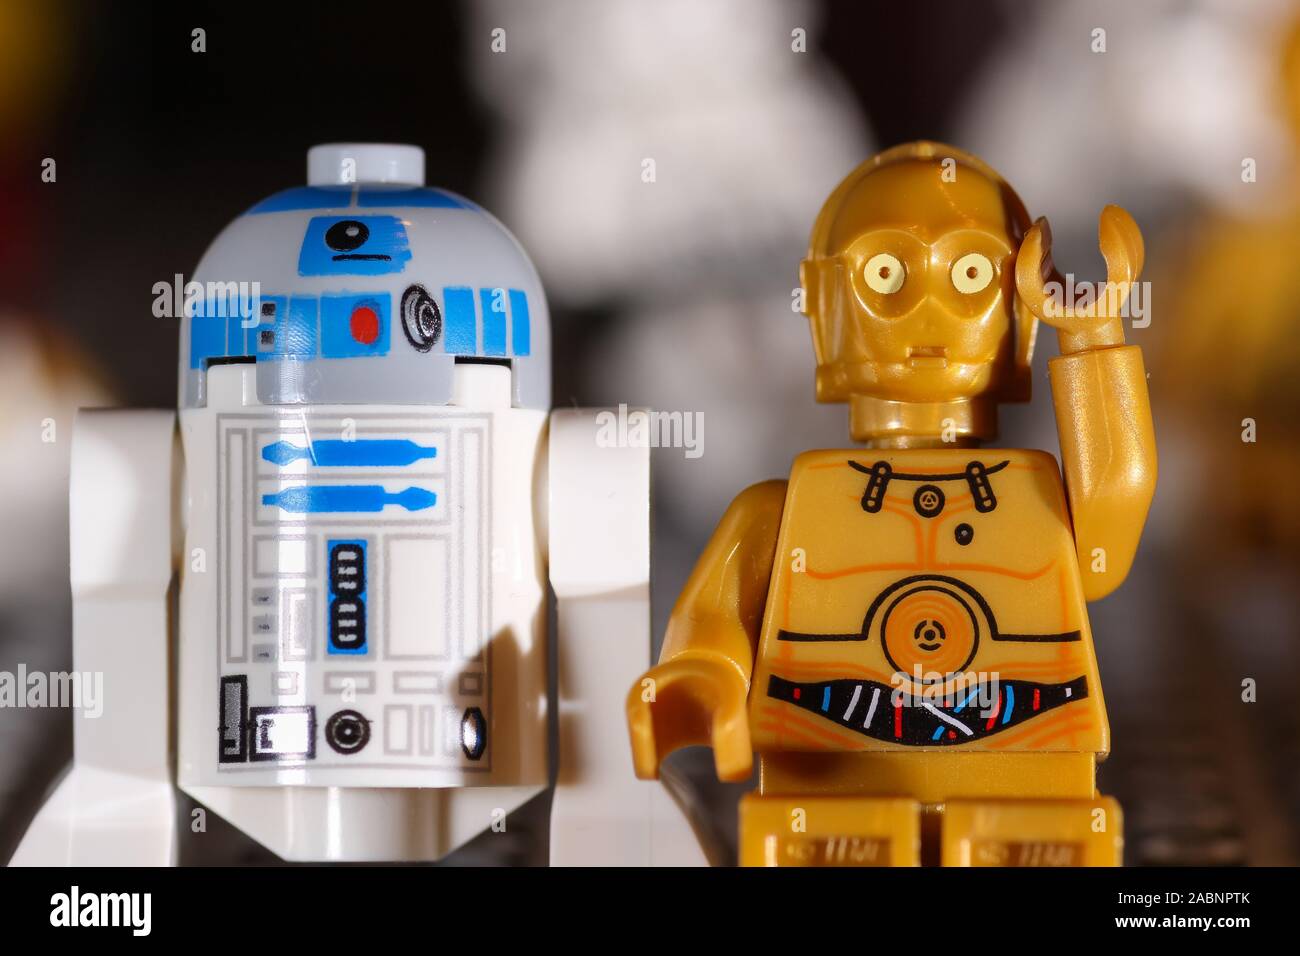 VINKOVCI, CROATIA - 01/24/2014:The famous science fiction film Star Wars robot character R2D2 and C3PO Stock Photo